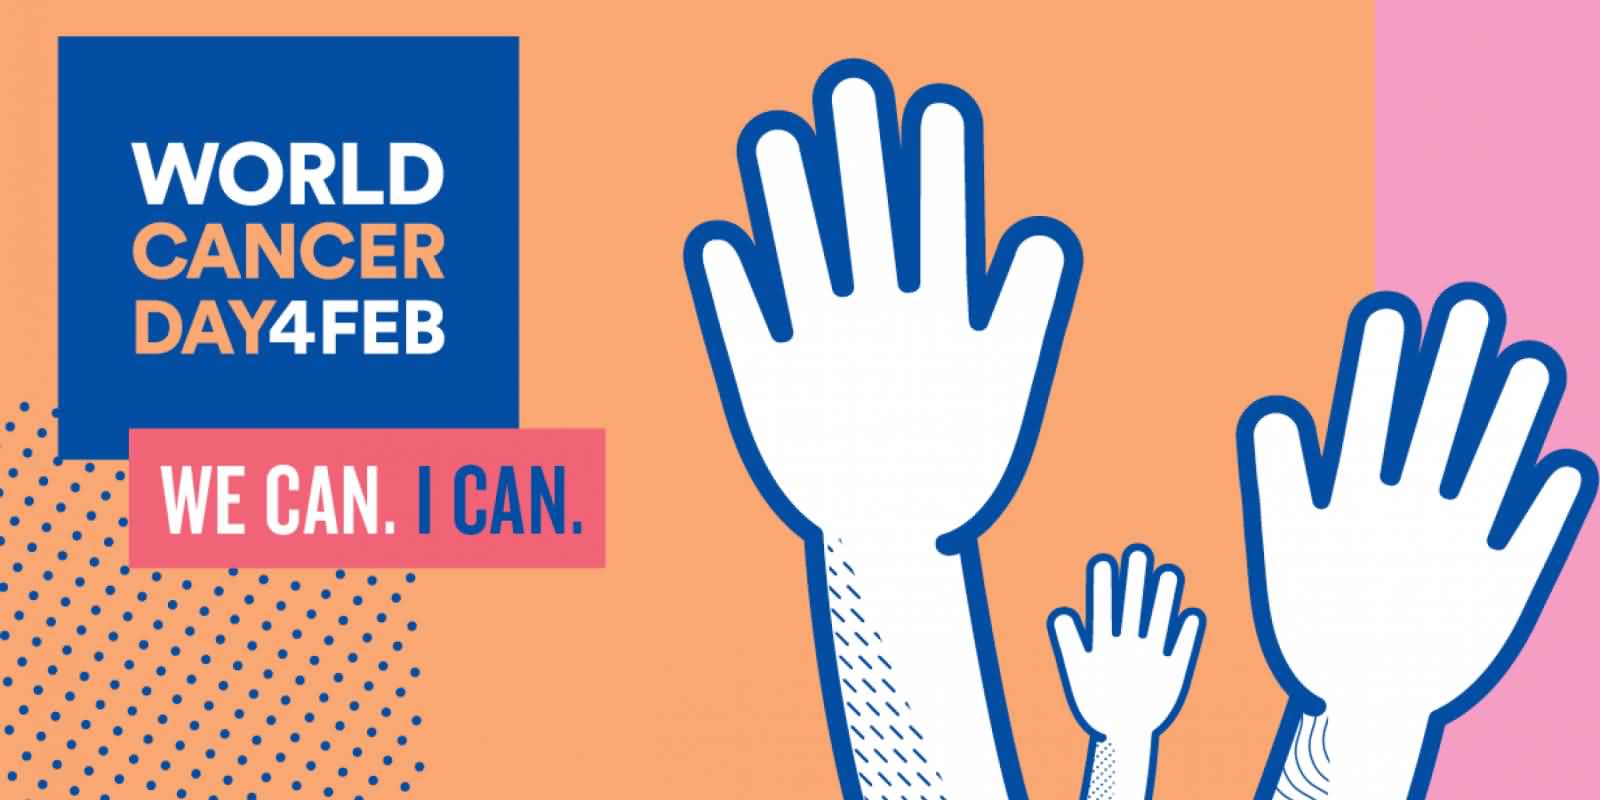 World Cancer Day 4 feb we can i can